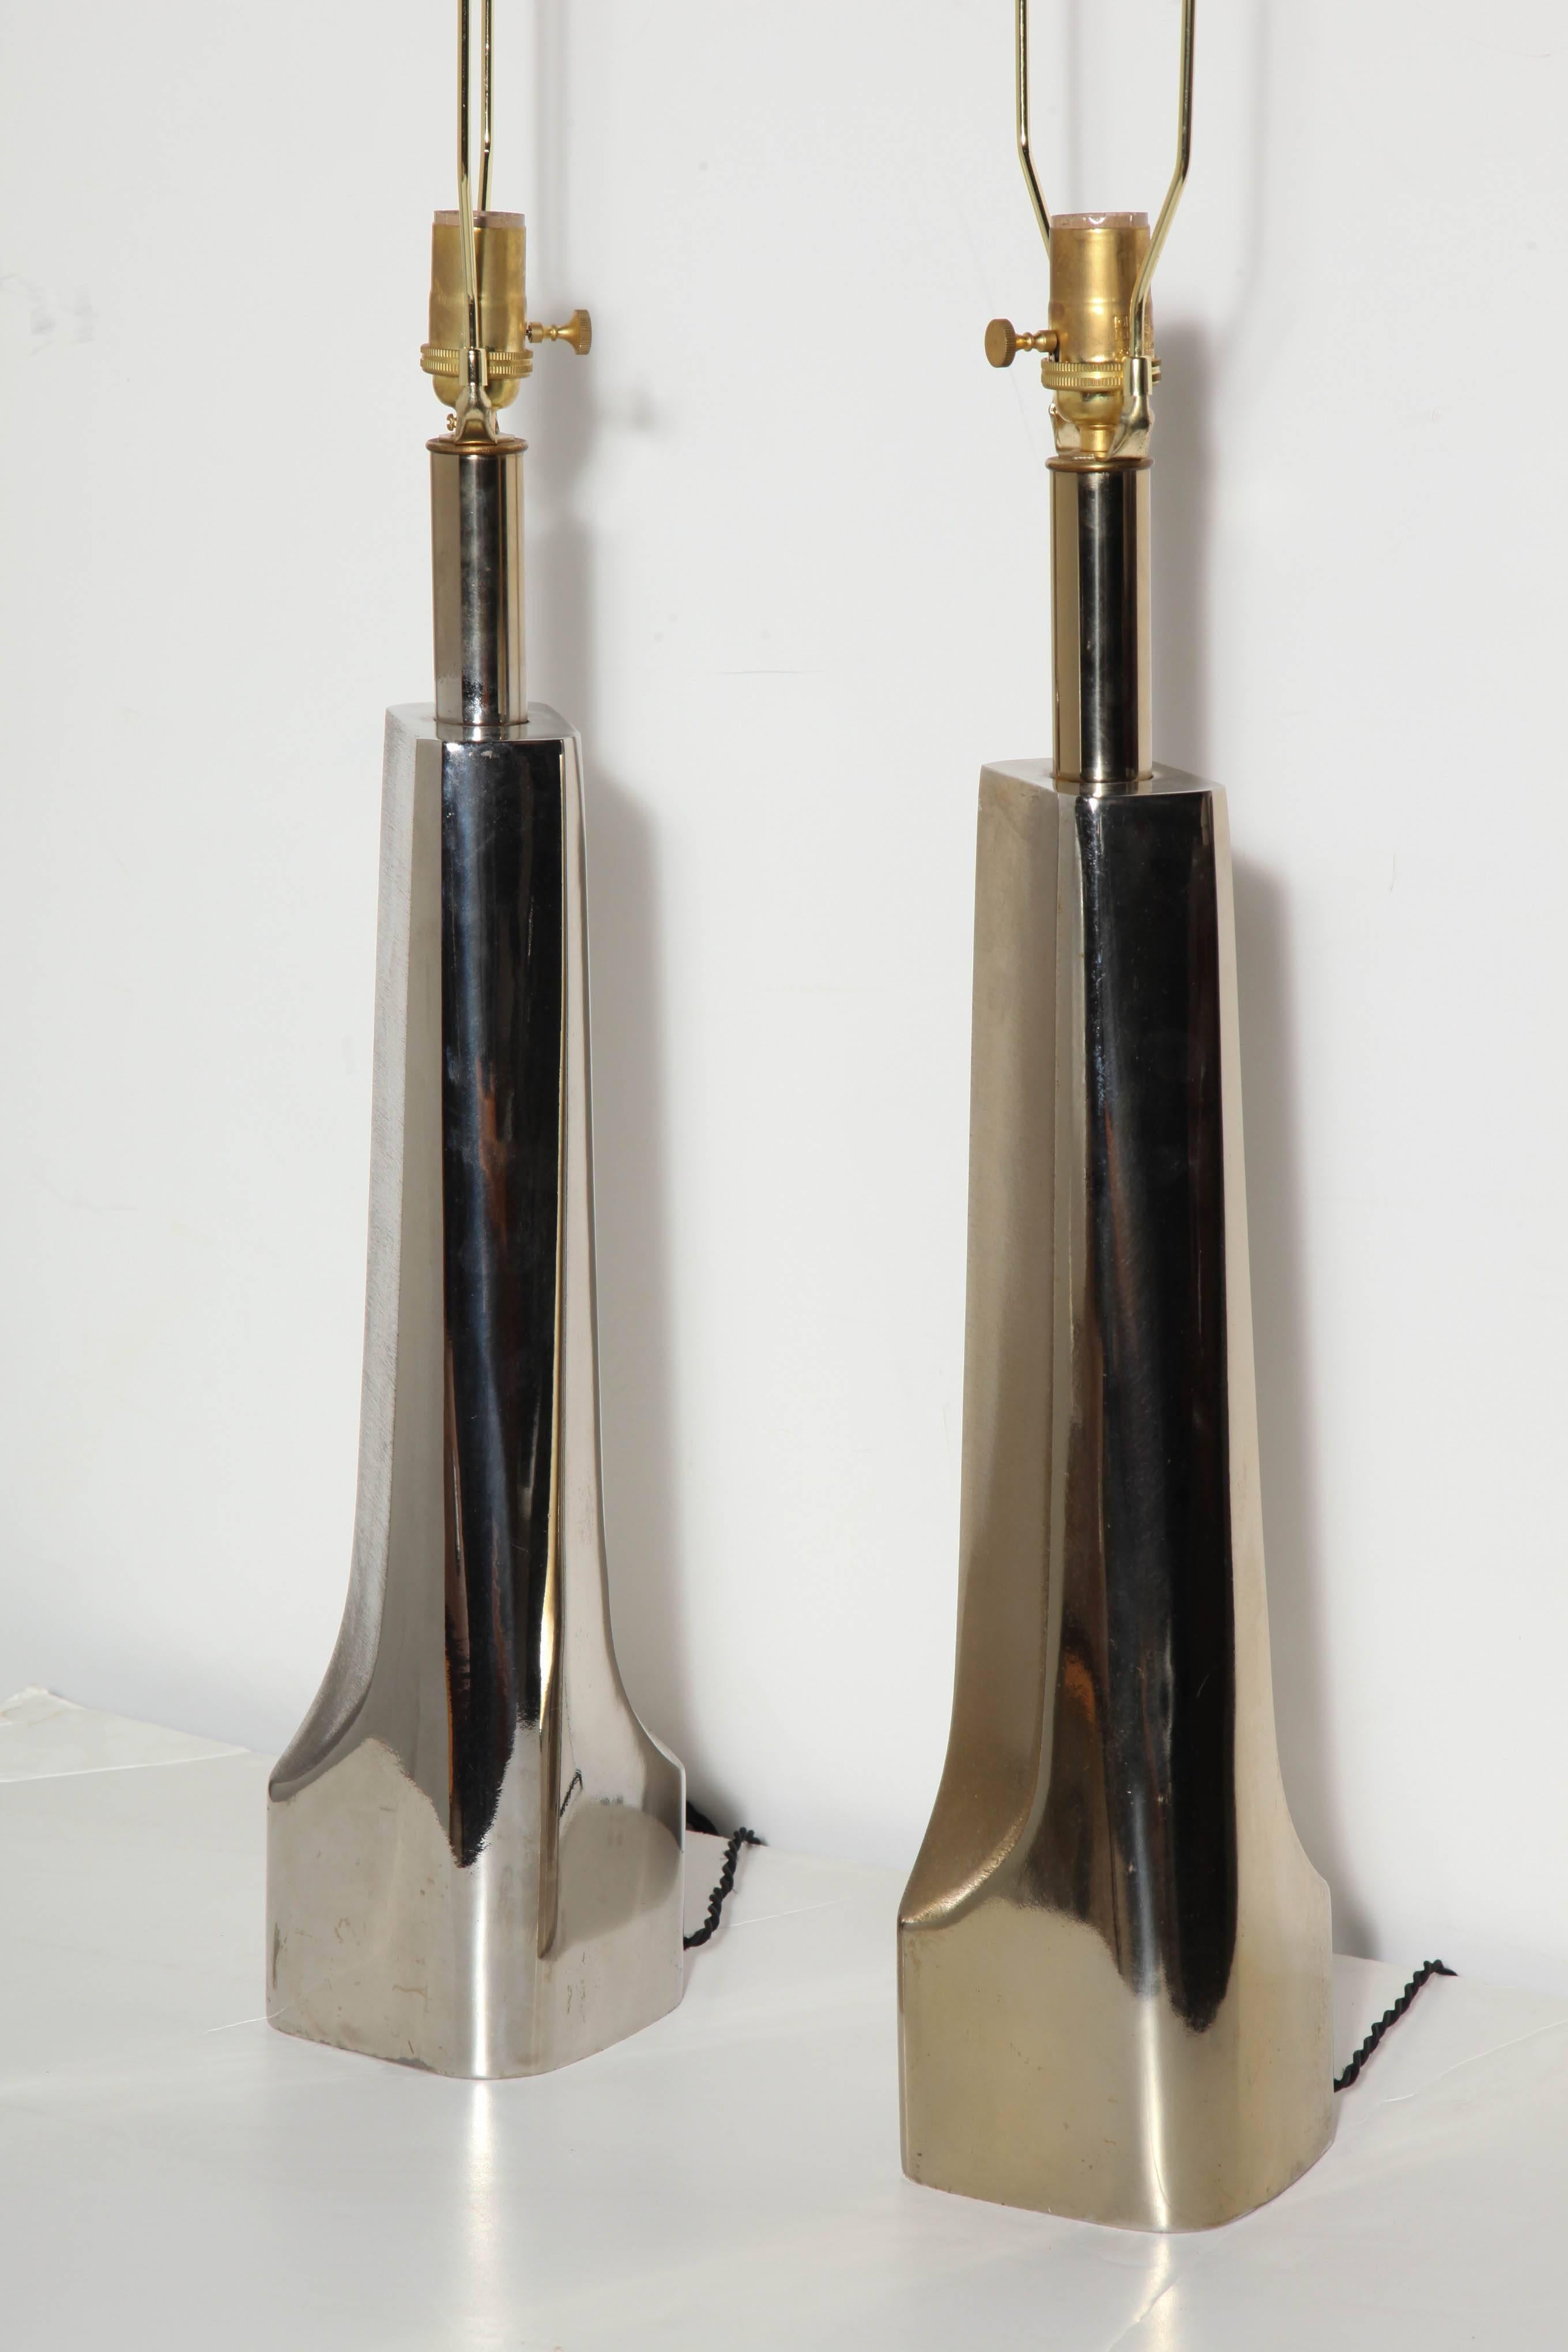 American Circa 1960 Pair of Maurizio Tempestini for Laurel Polished Brutalist Table Lamps